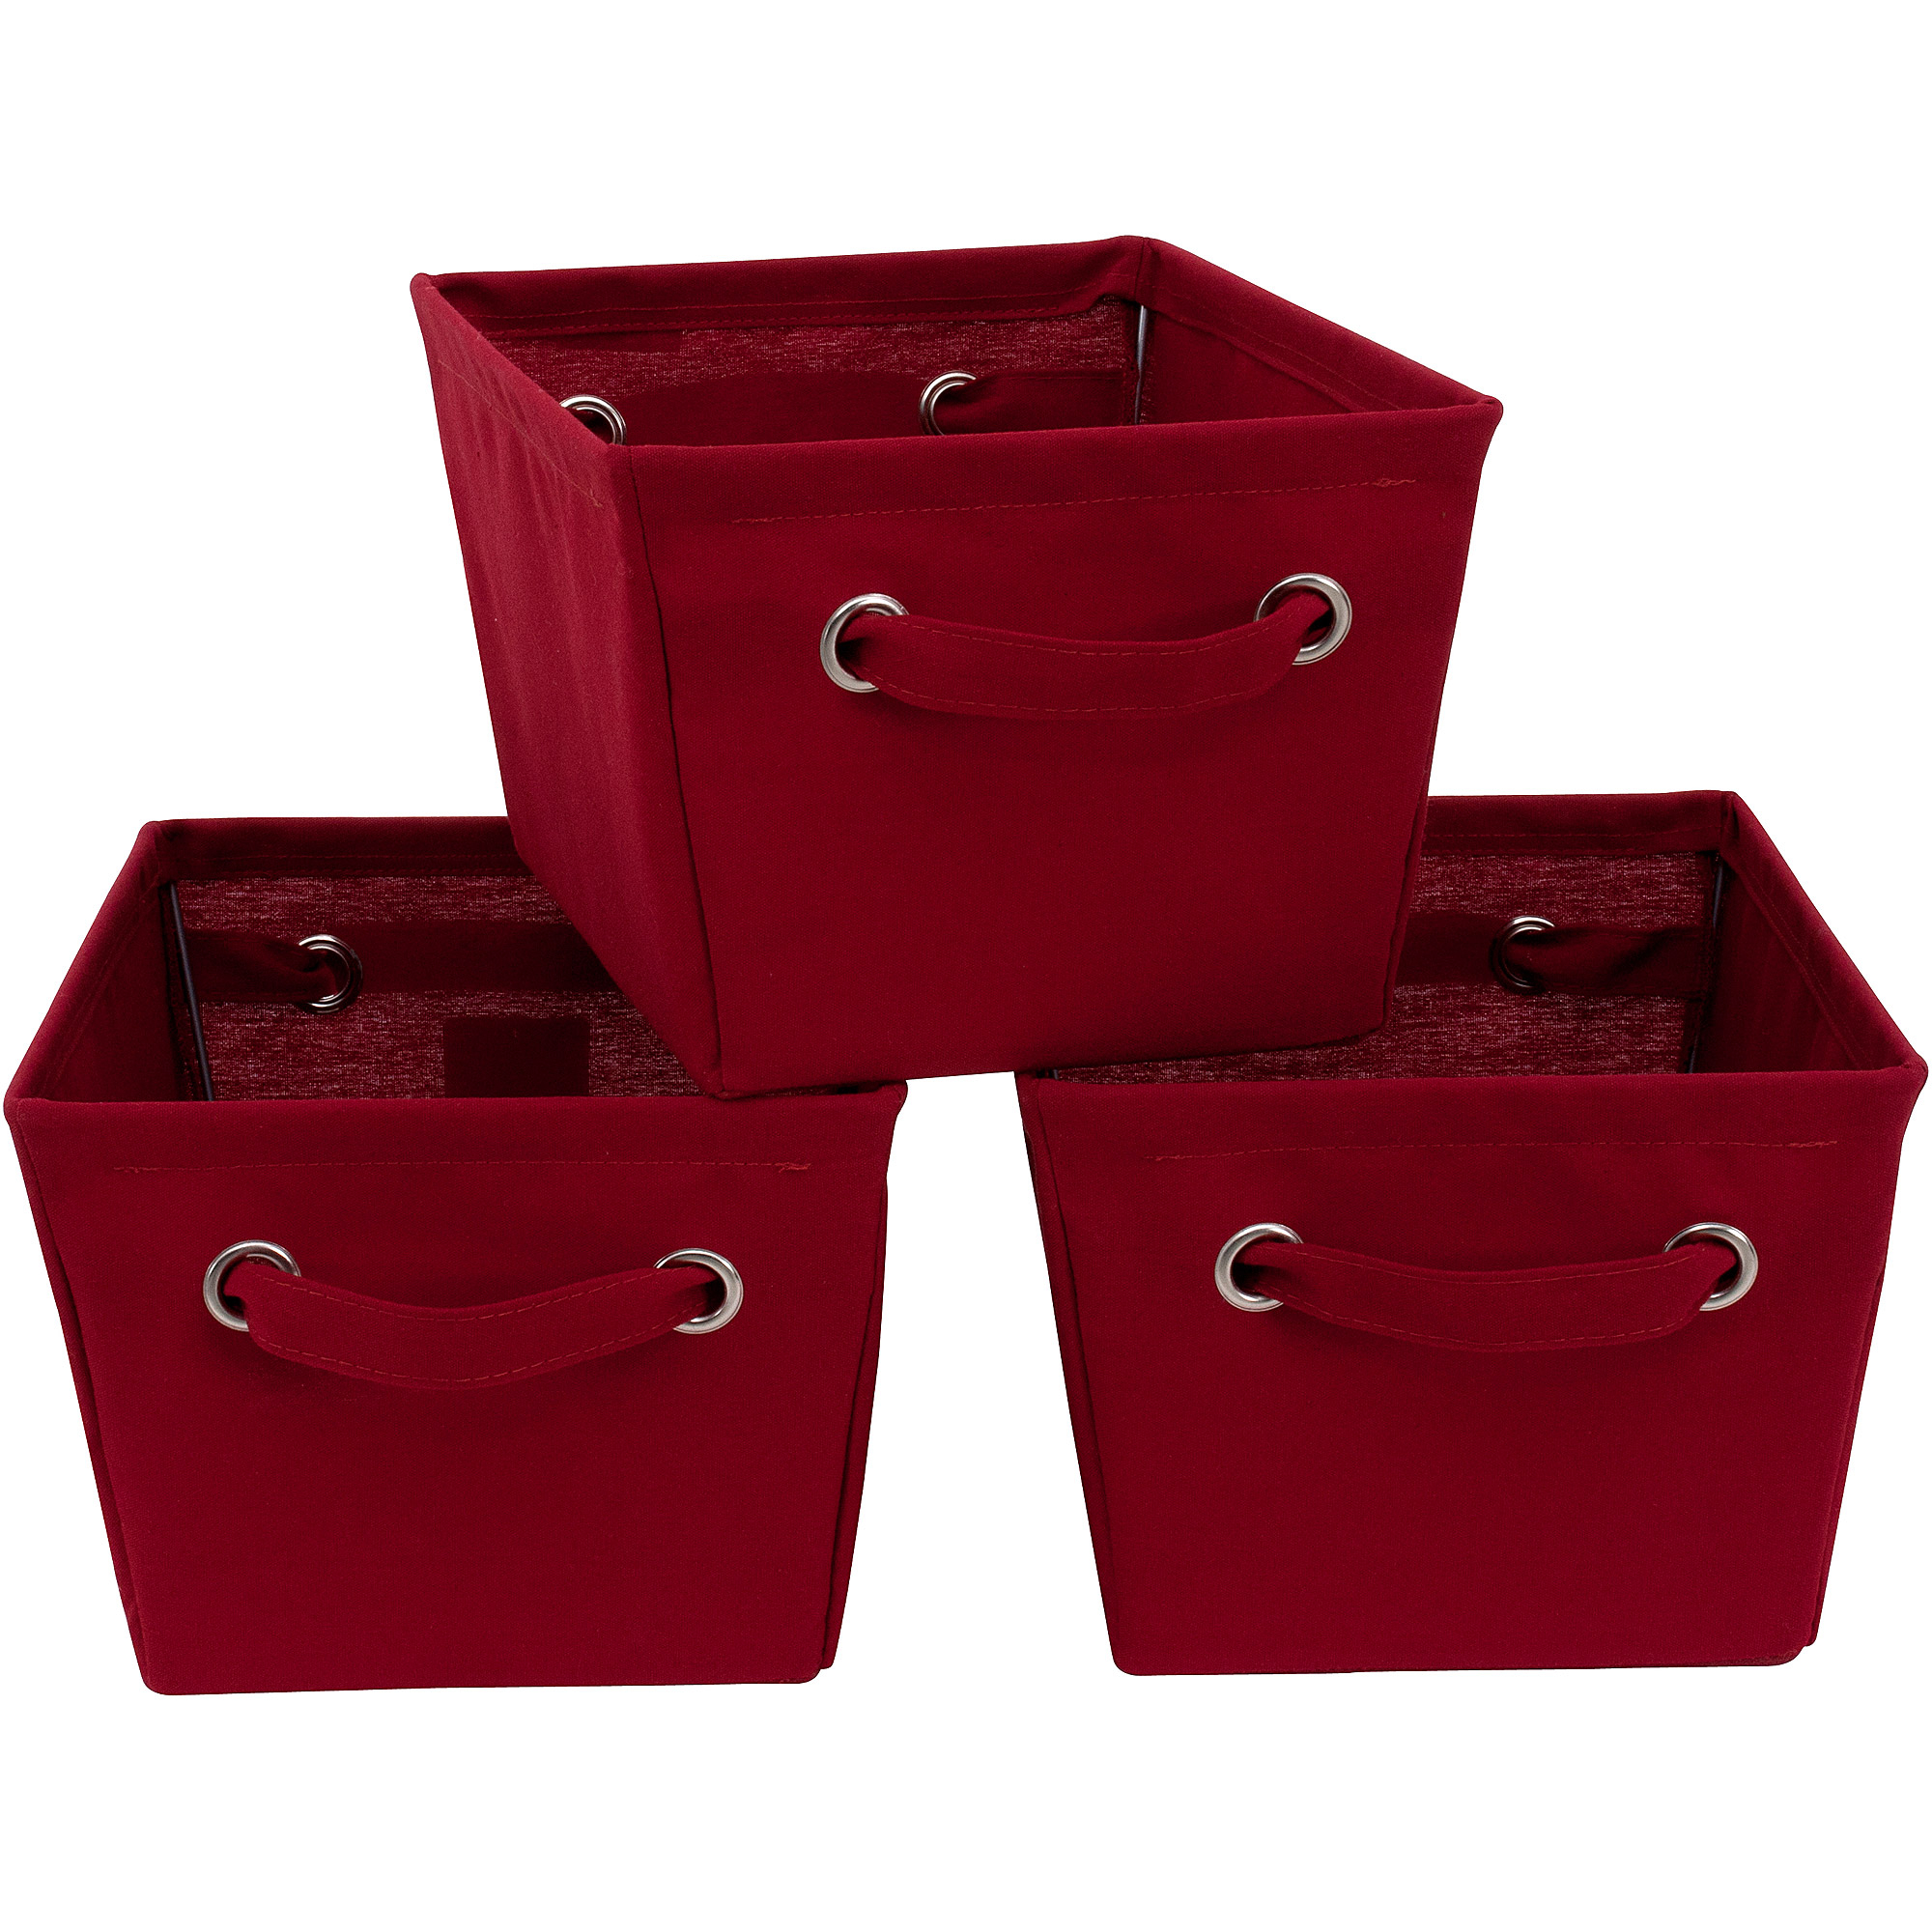 Mainstays 3 Pack Medium Canvas Bins Red Sedona Walmart within proportions 2000 X 2000